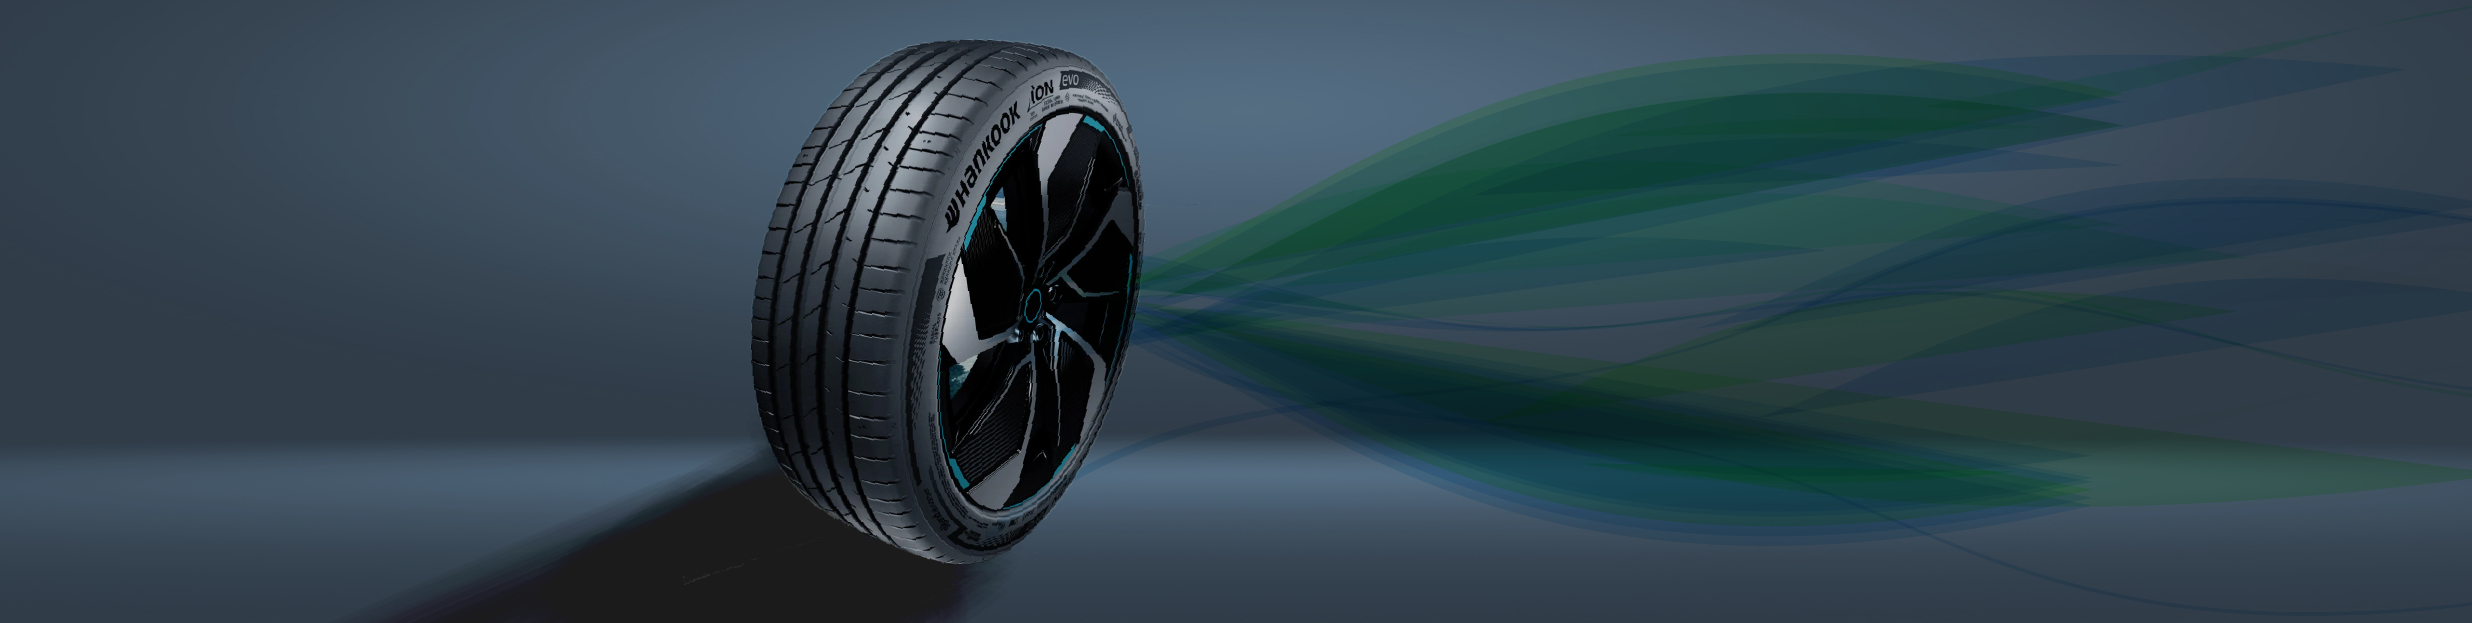 Tyres for electric vehicles